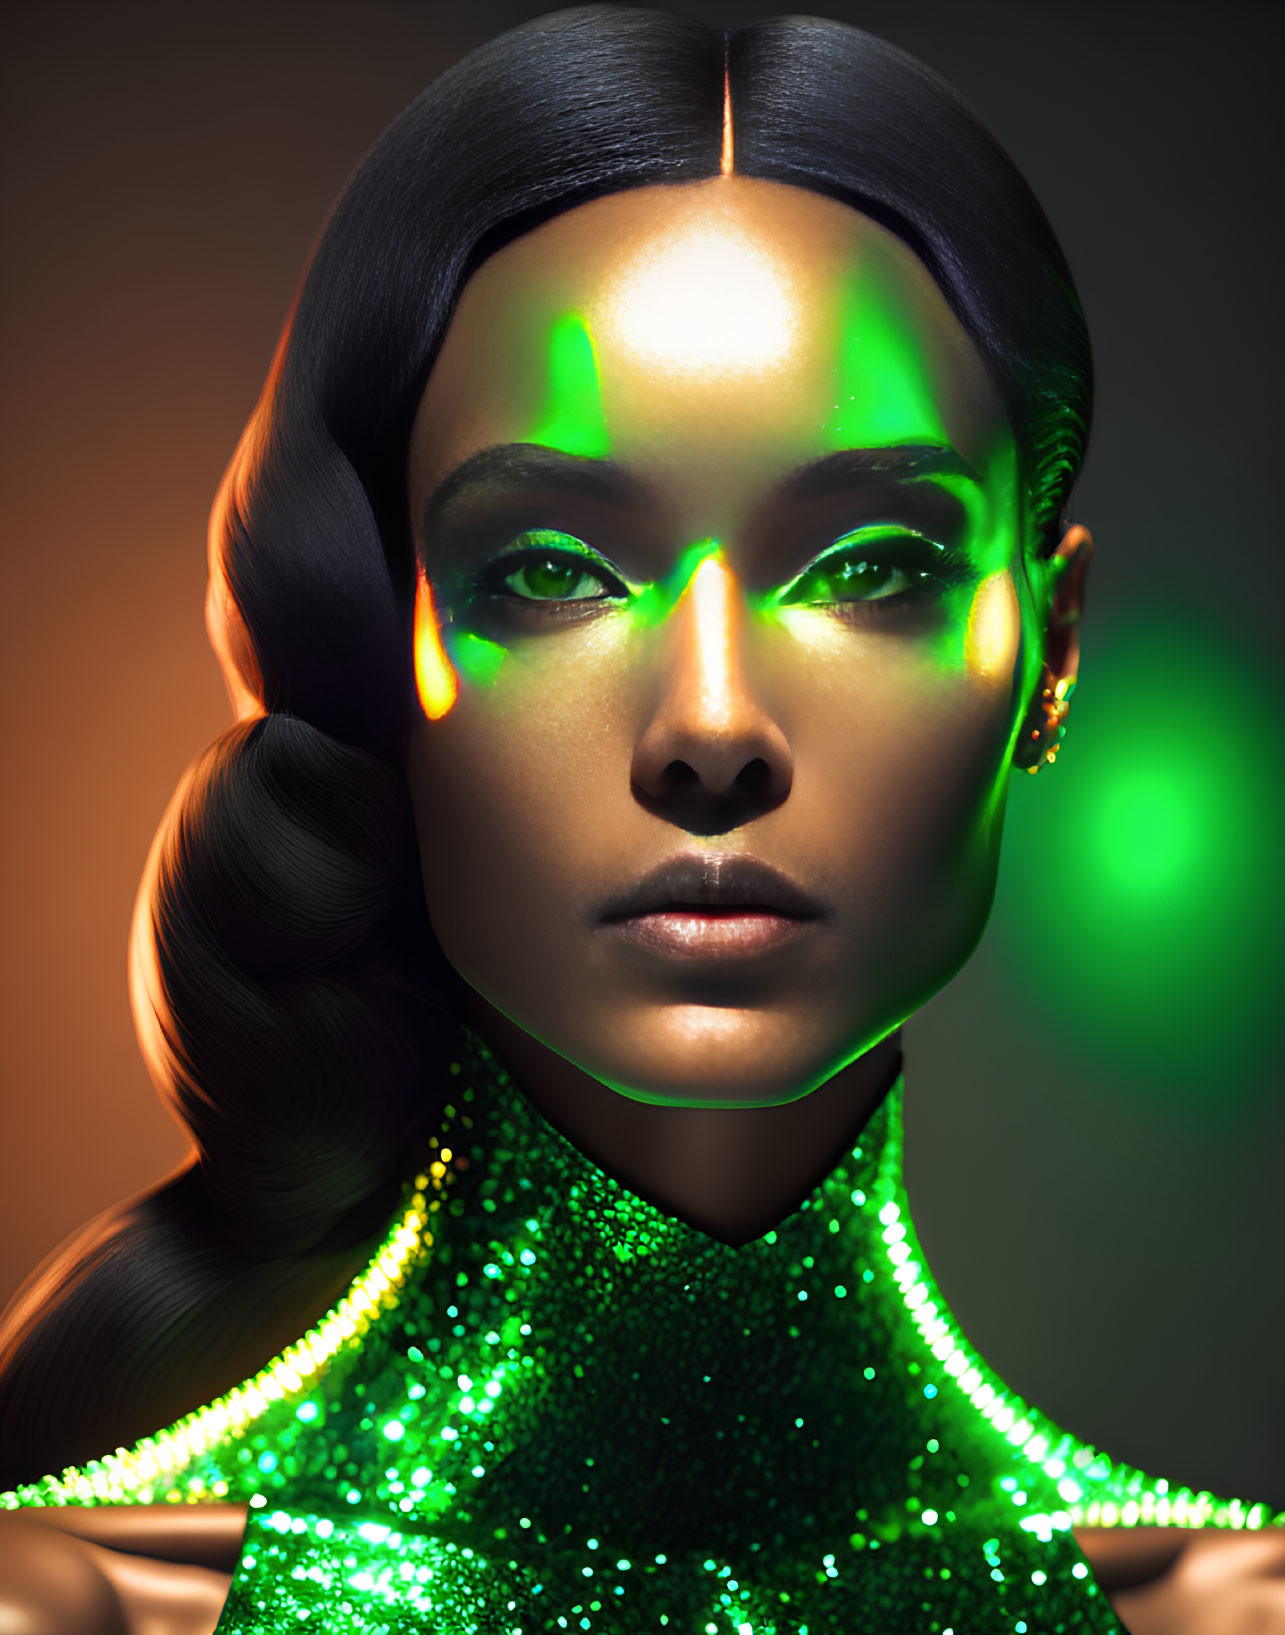 Portrait of Woman with Sleek Hair and Green Neon Lighting in Shimmering Garment